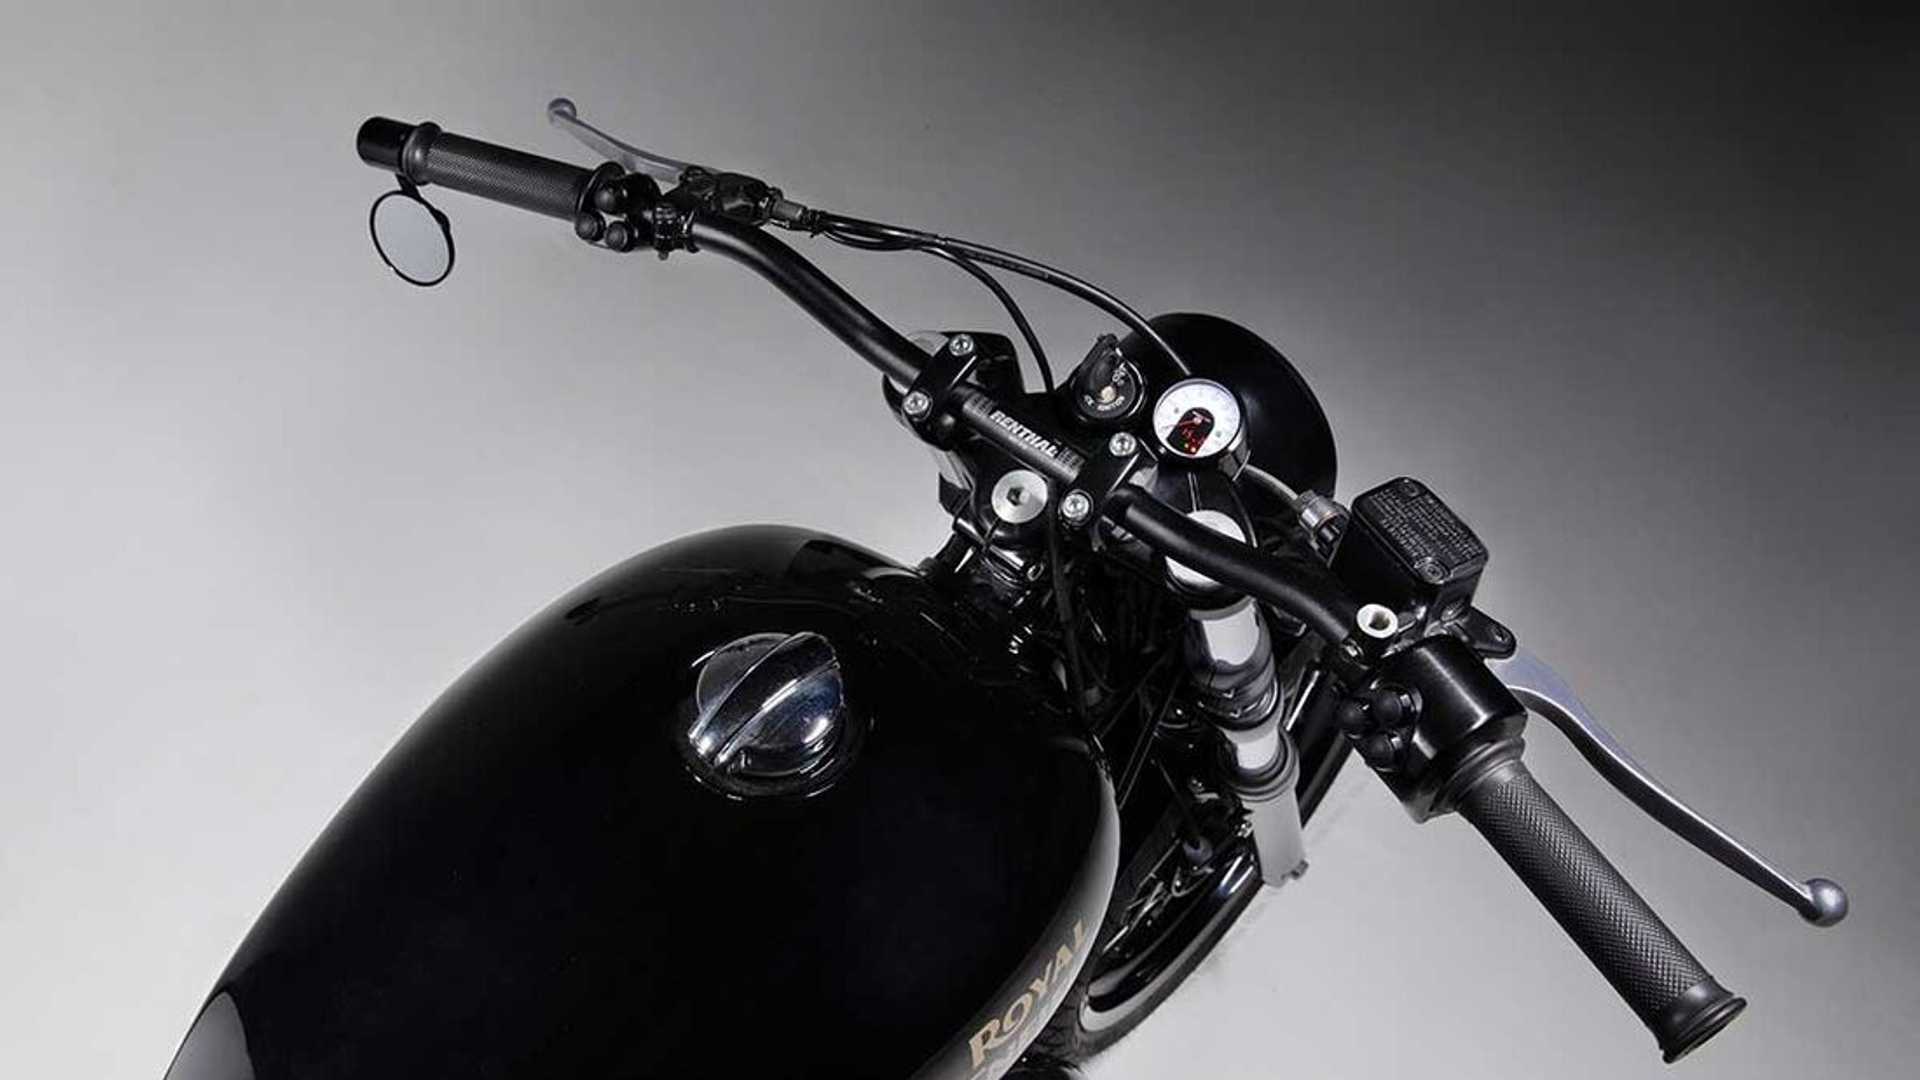 A view of the handlebars available in a kit from Bad Winners for Royal Enfield Twins